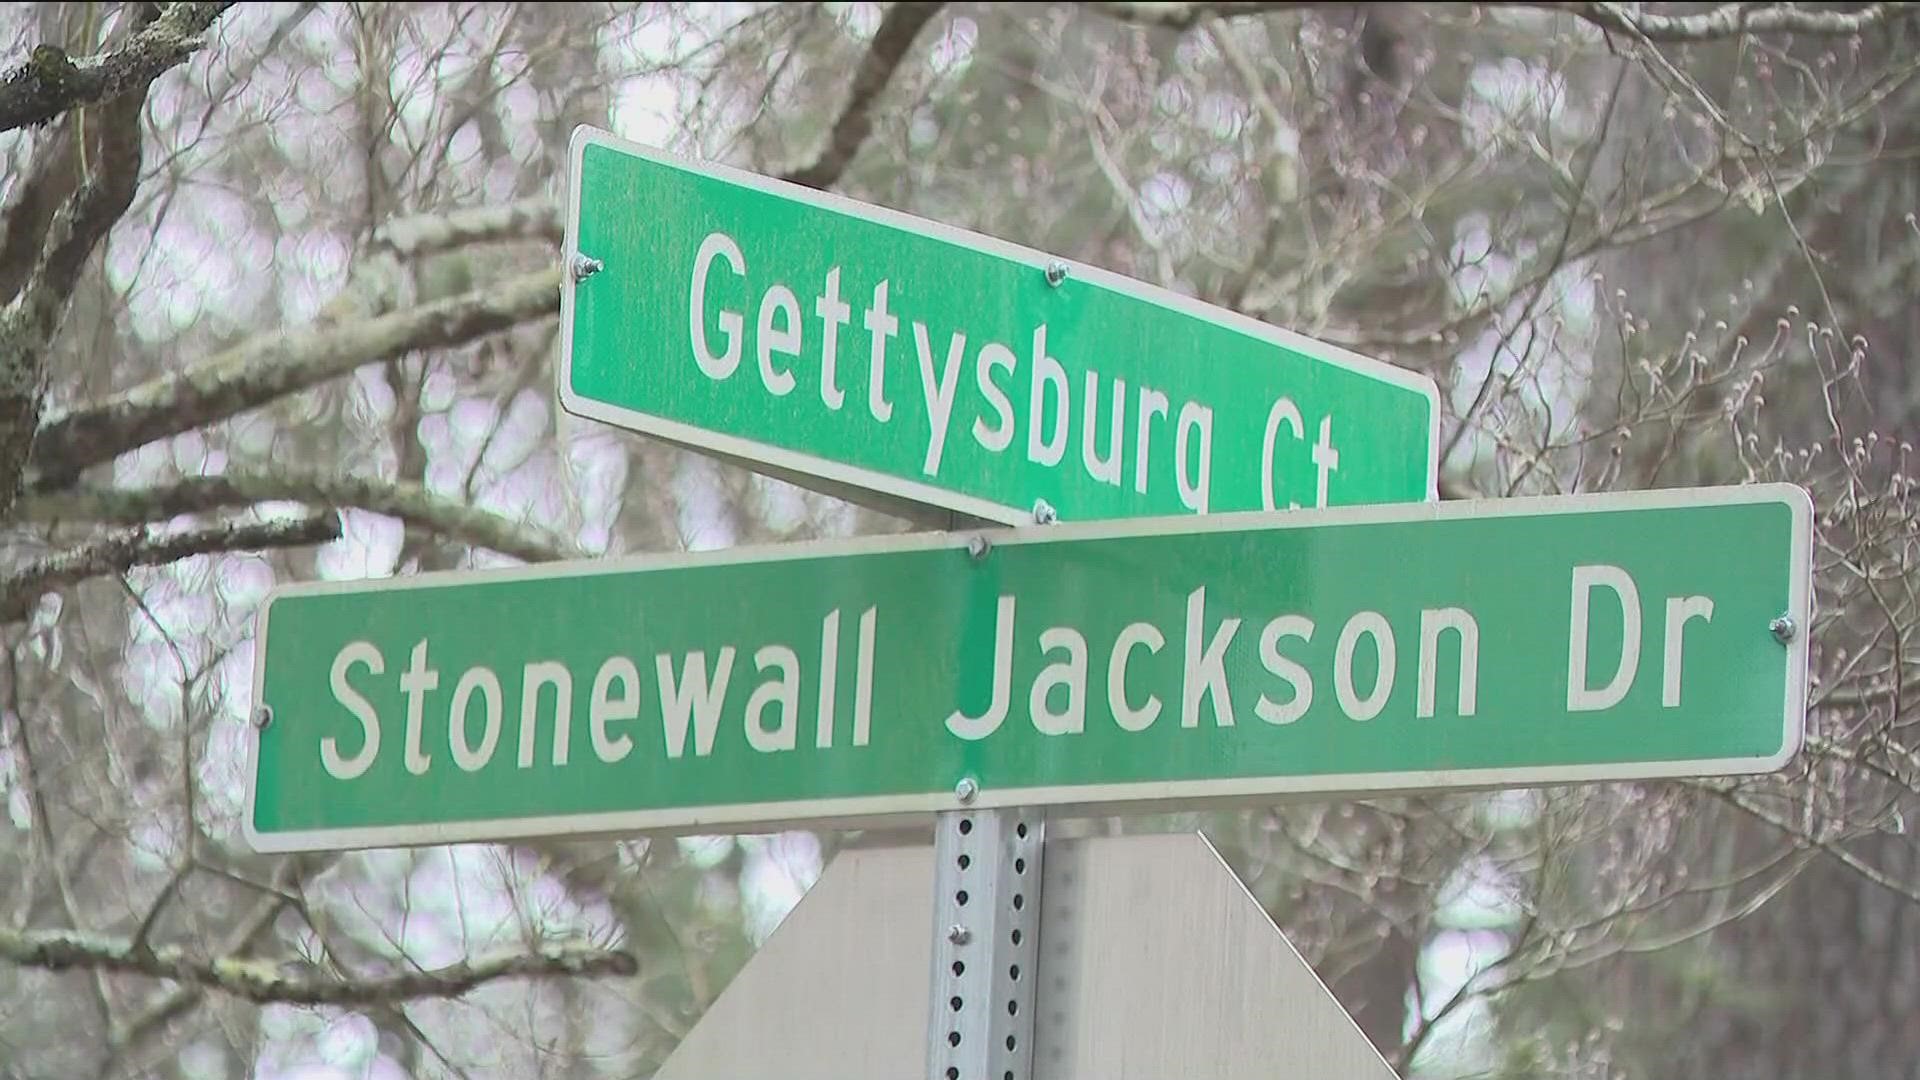 Clayton County commissioners will meet to decide whether to change more than a dozen street names.